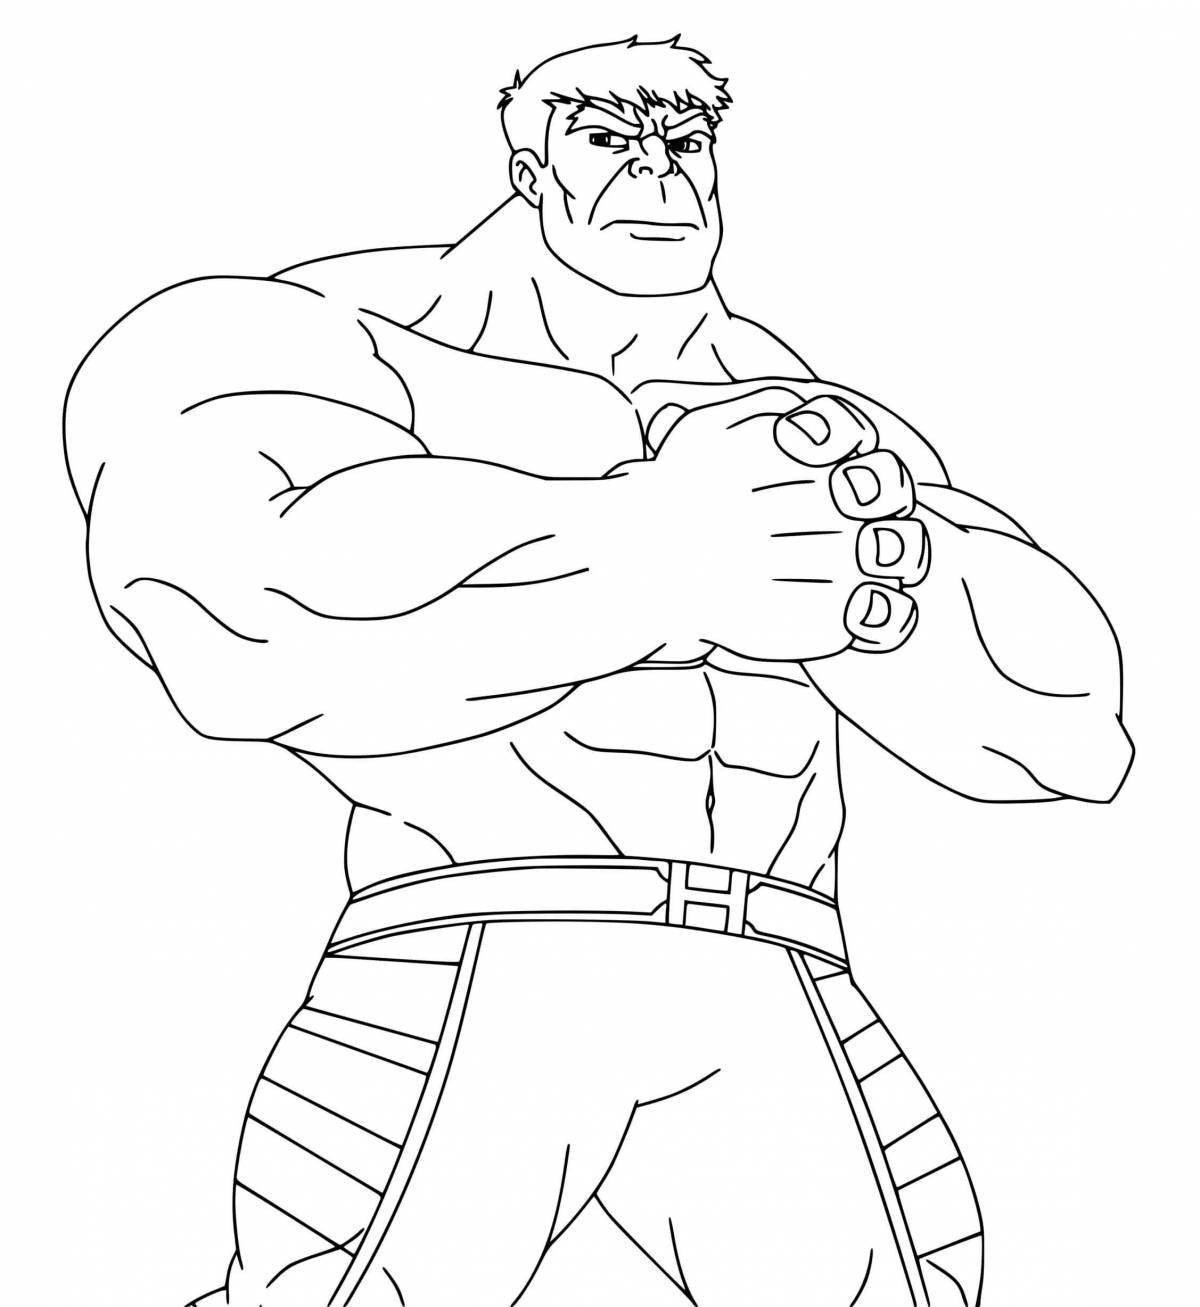 Coloring playful hulk for children 5-6 years old